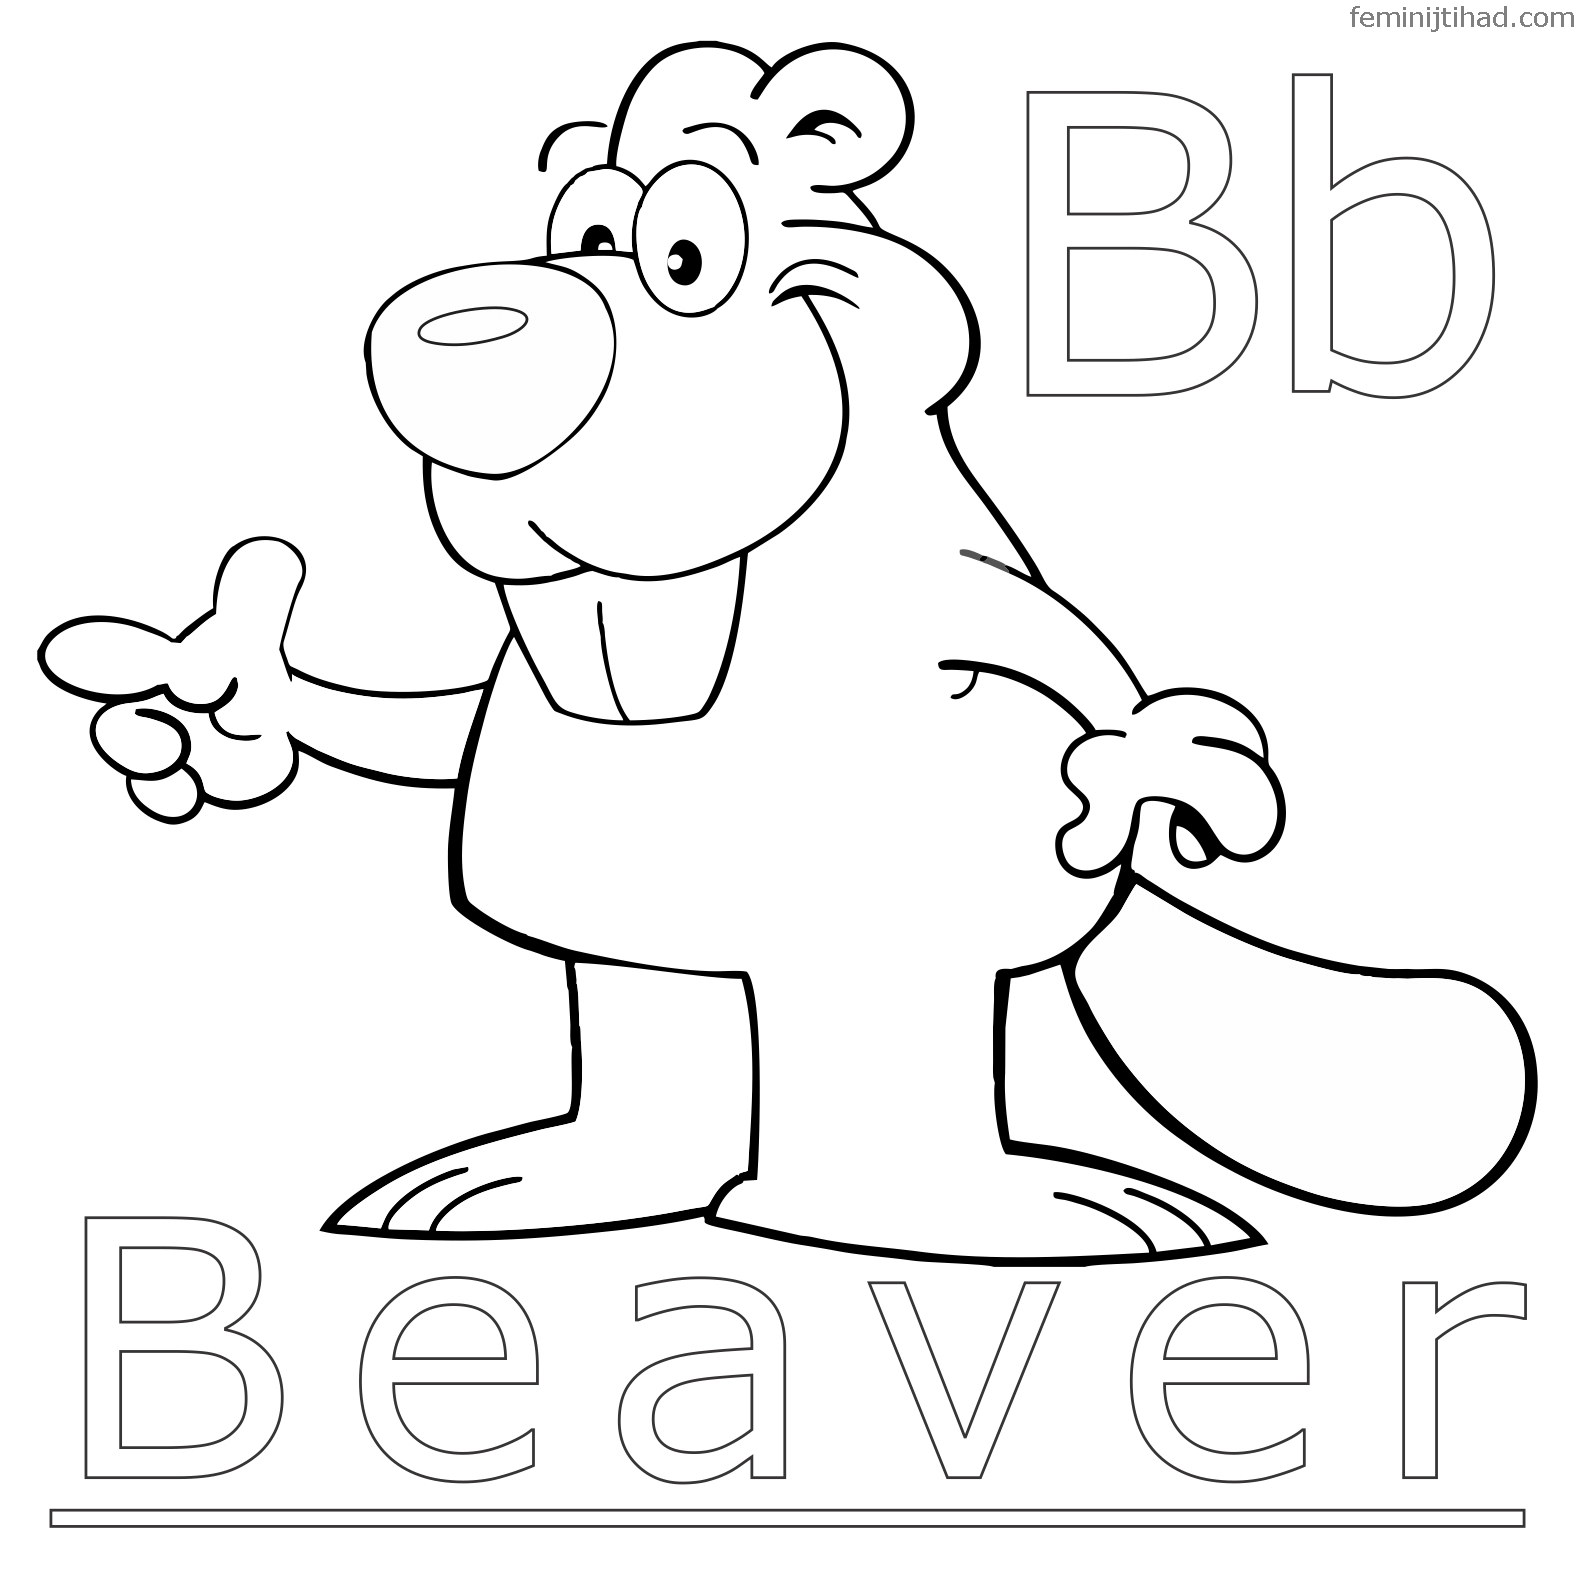 Beaver Dam Coloring Page Sketch Coloring Page